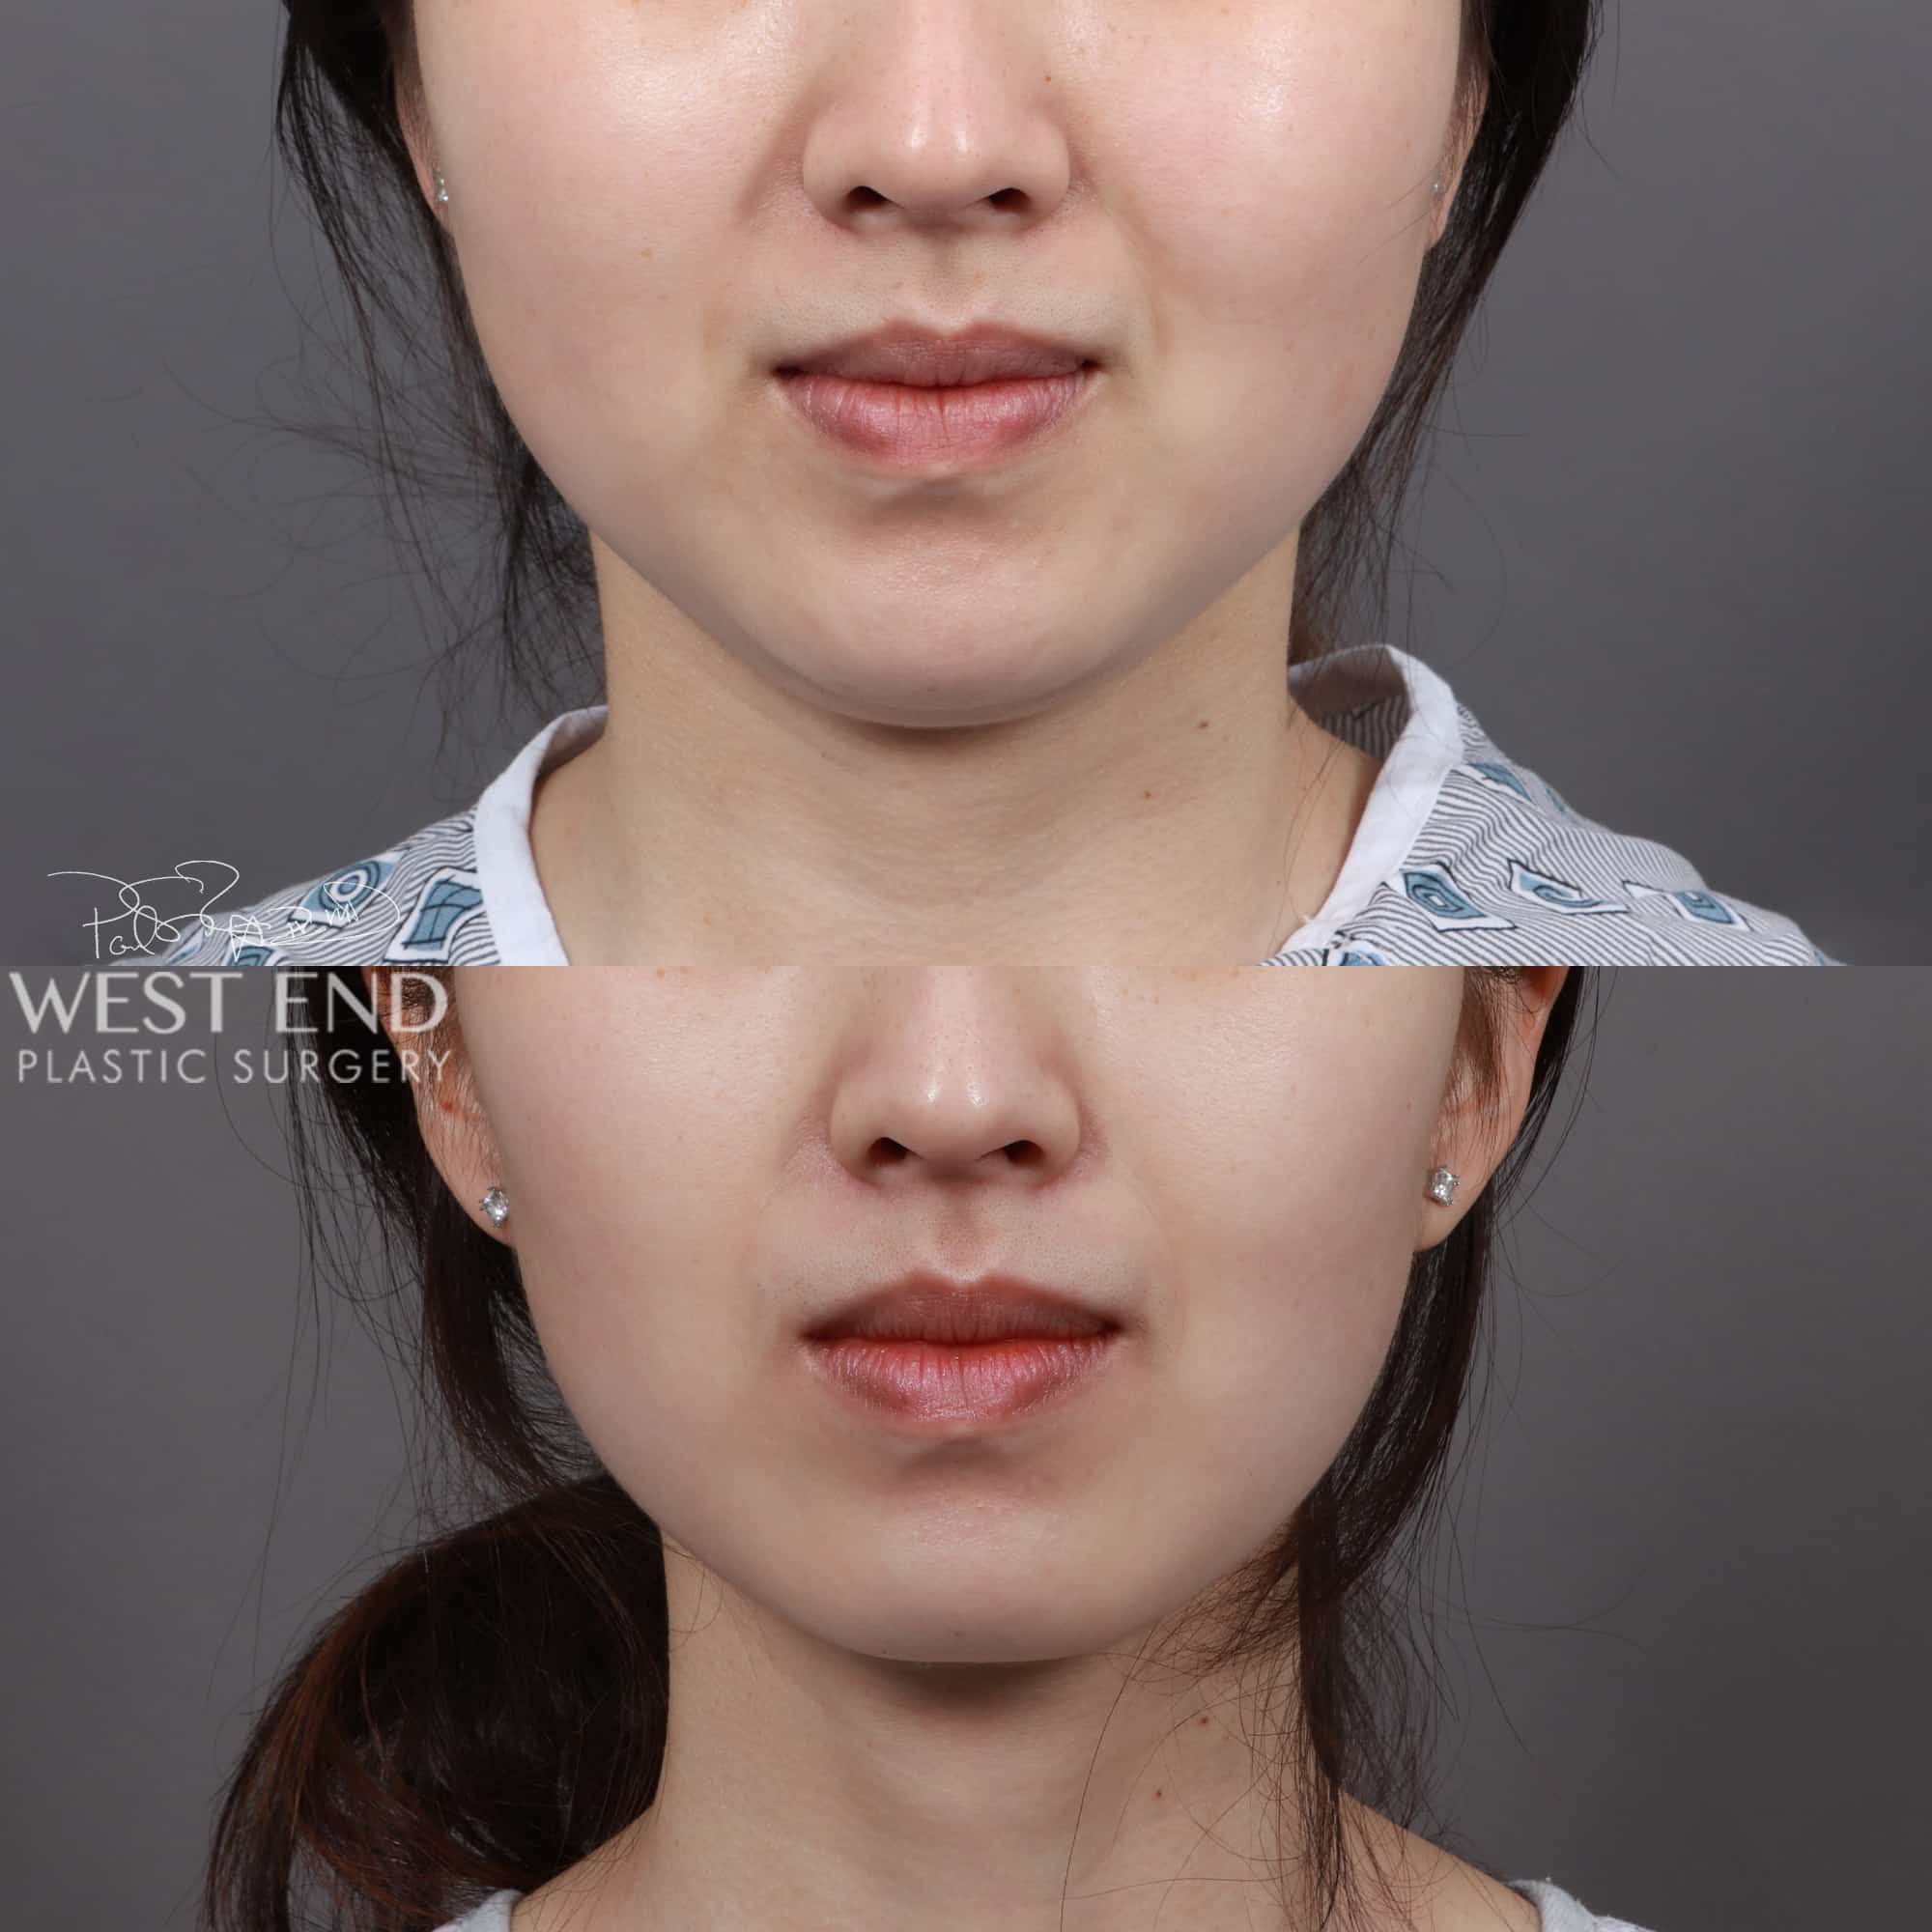 Liposuction & Buccal Fat Pad Removal